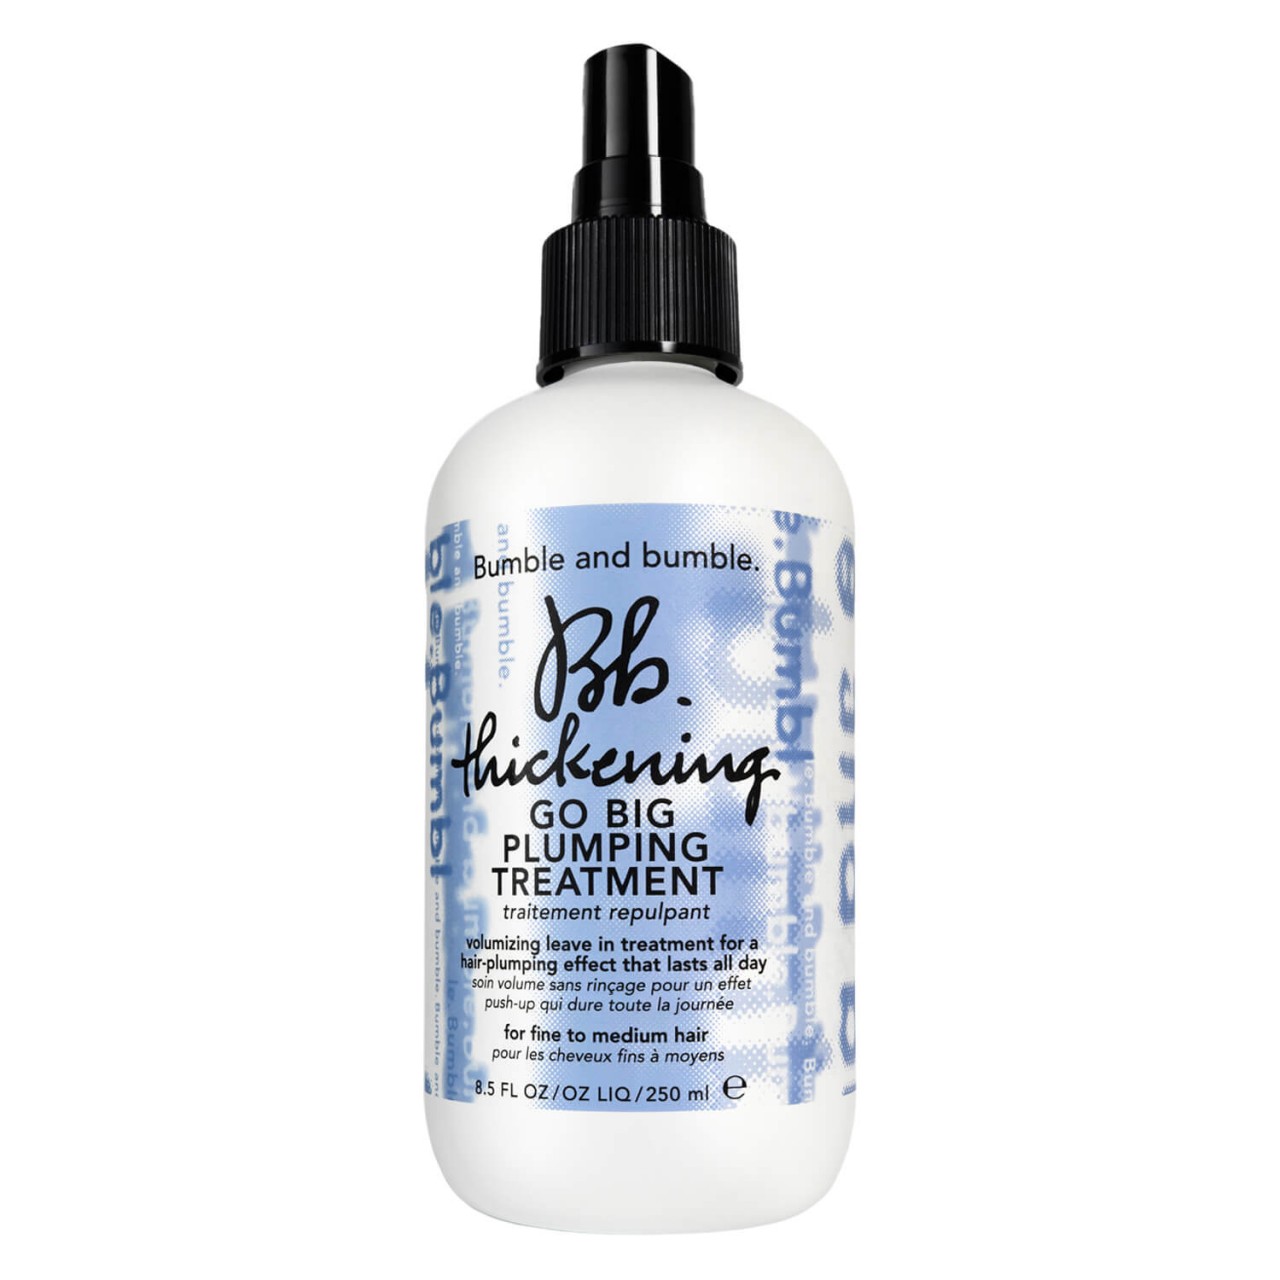 Bb. Thickening Go Big Plumping Treatment von Bumble and bumble.